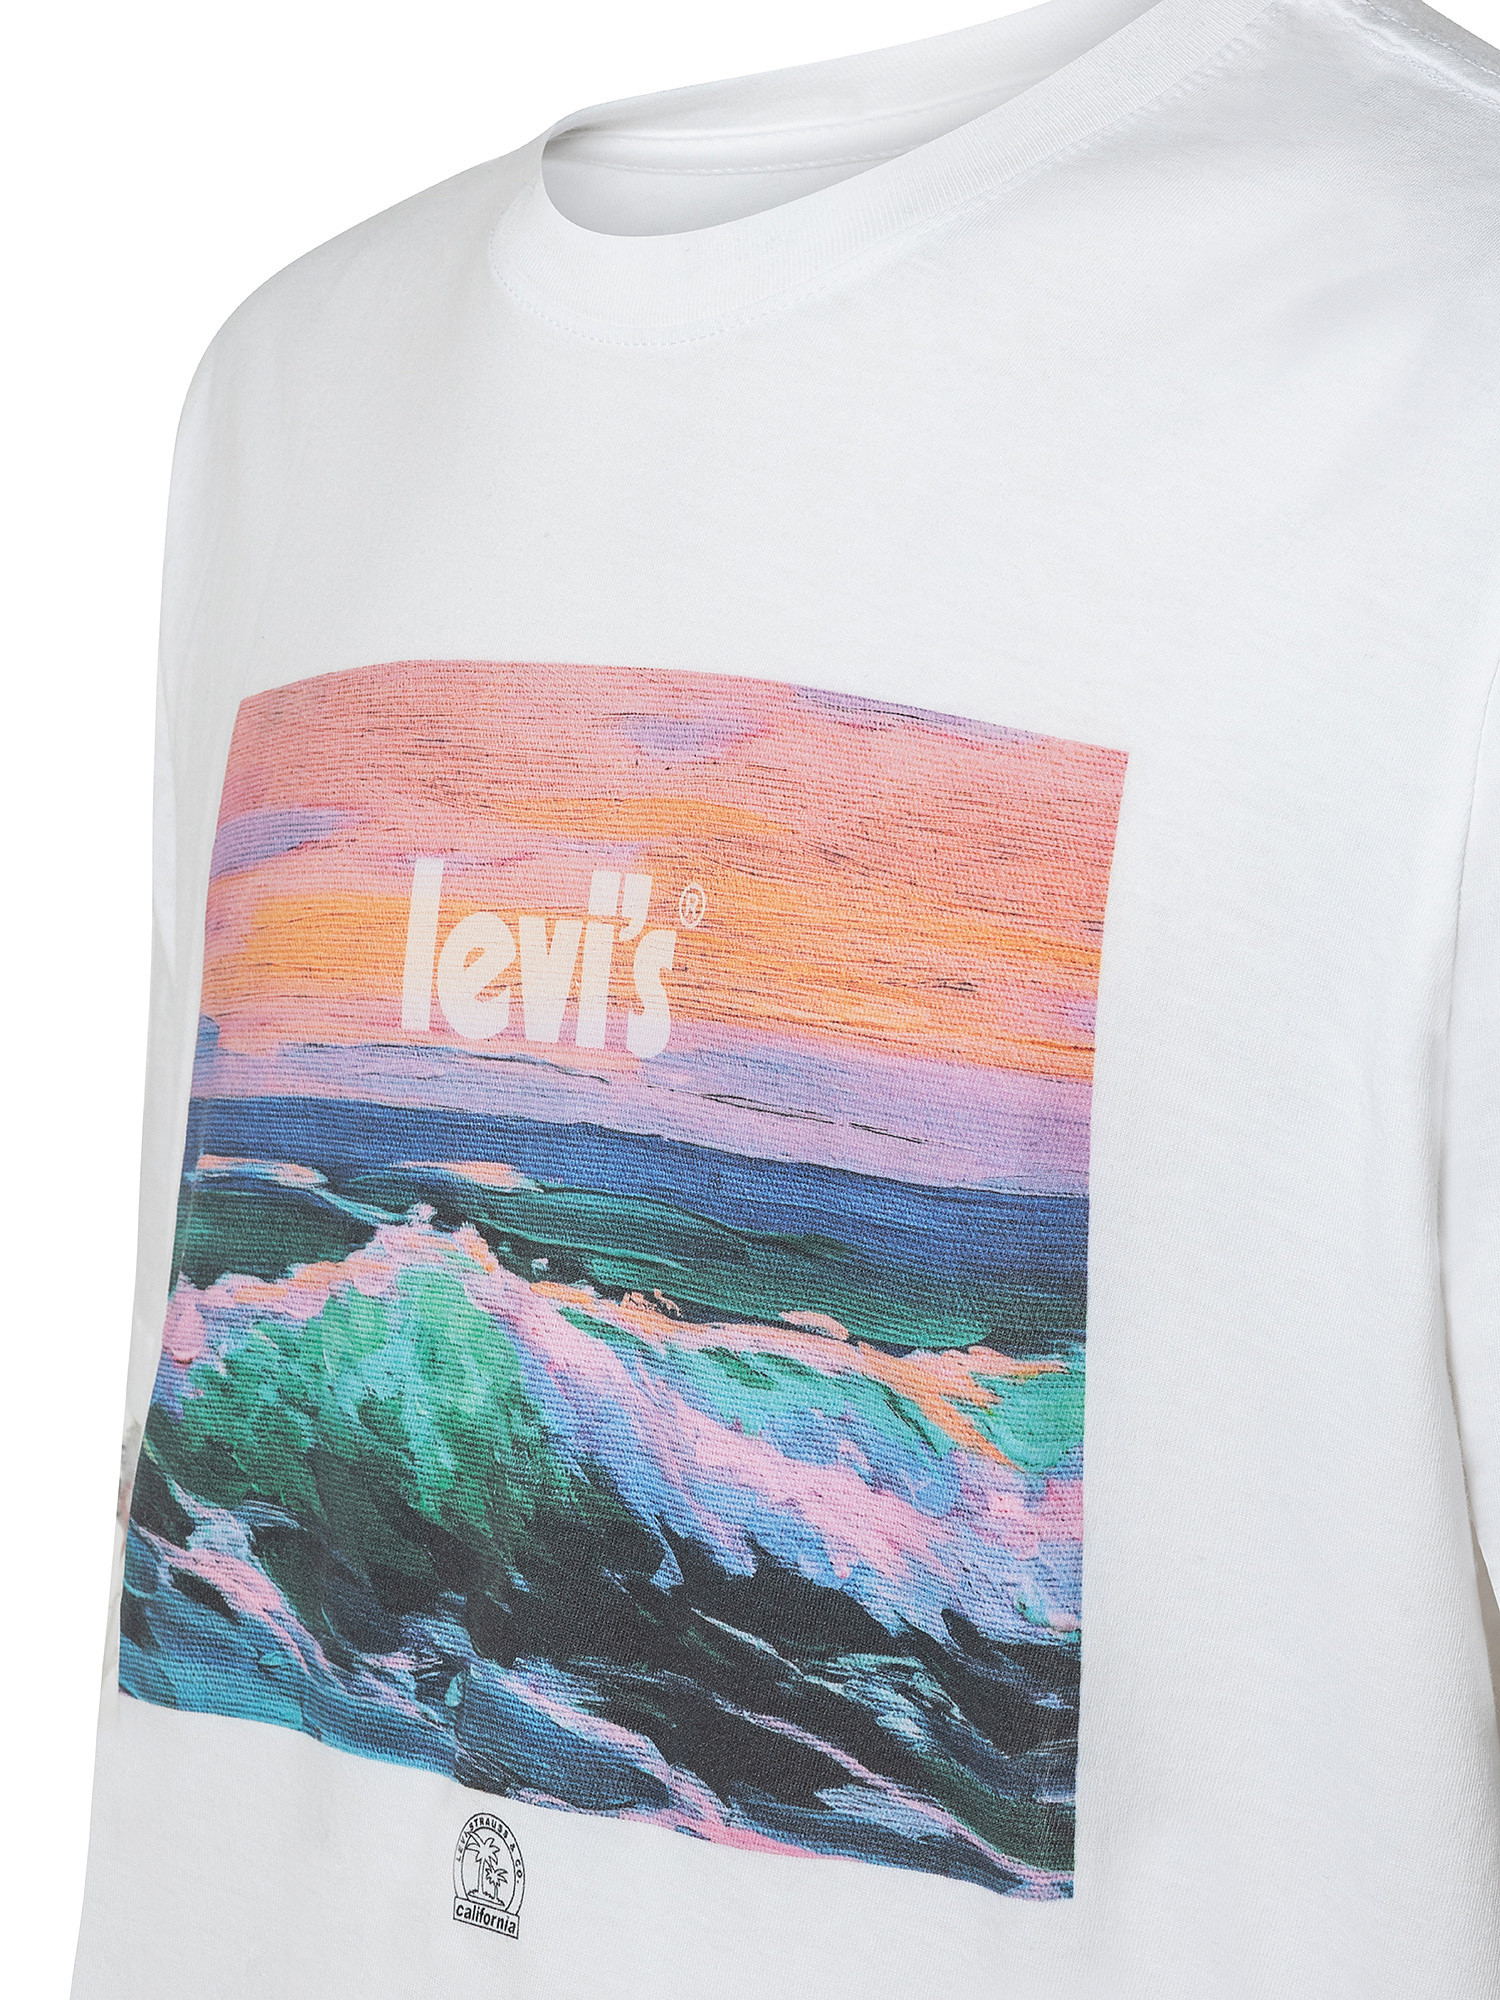 Graphic Tee, White, large image number 2